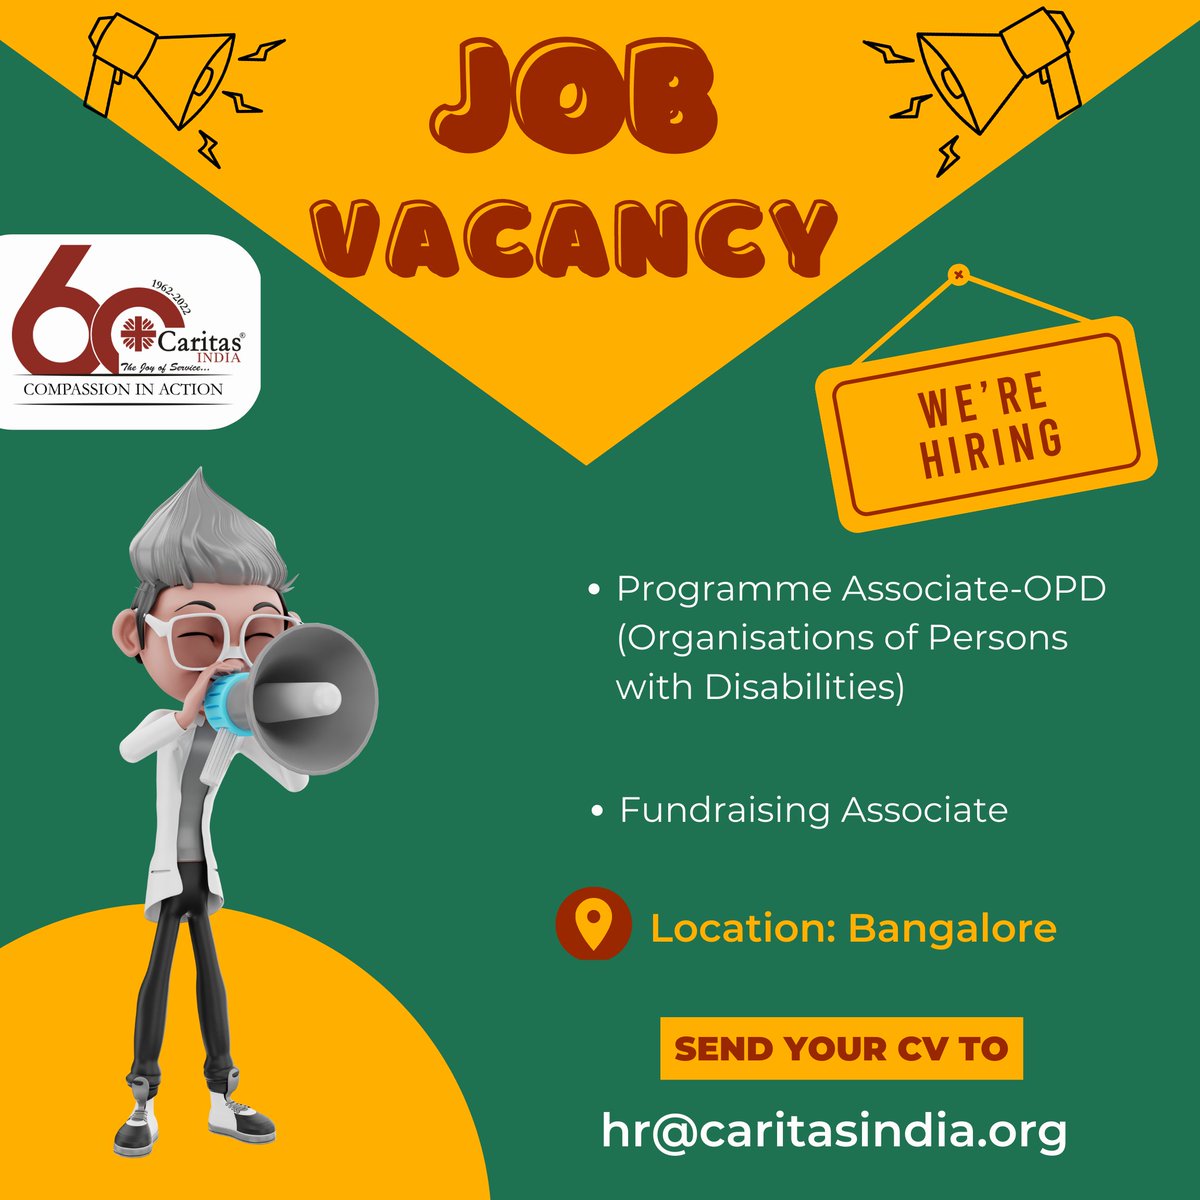 𝗪𝗘 𝗔𝗥𝗘 𝗛𝗜𝗥𝗜𝗡𝗚

Caritas India is hiring for the following positions for Bangalore Location:

⭕Fundraising Associate
⭕Programme Associate (Organisations of Persons with Disabilities)

Send your Resume to: hr@caritasindia.org
For More Info visit: caritasindia.org/jobs